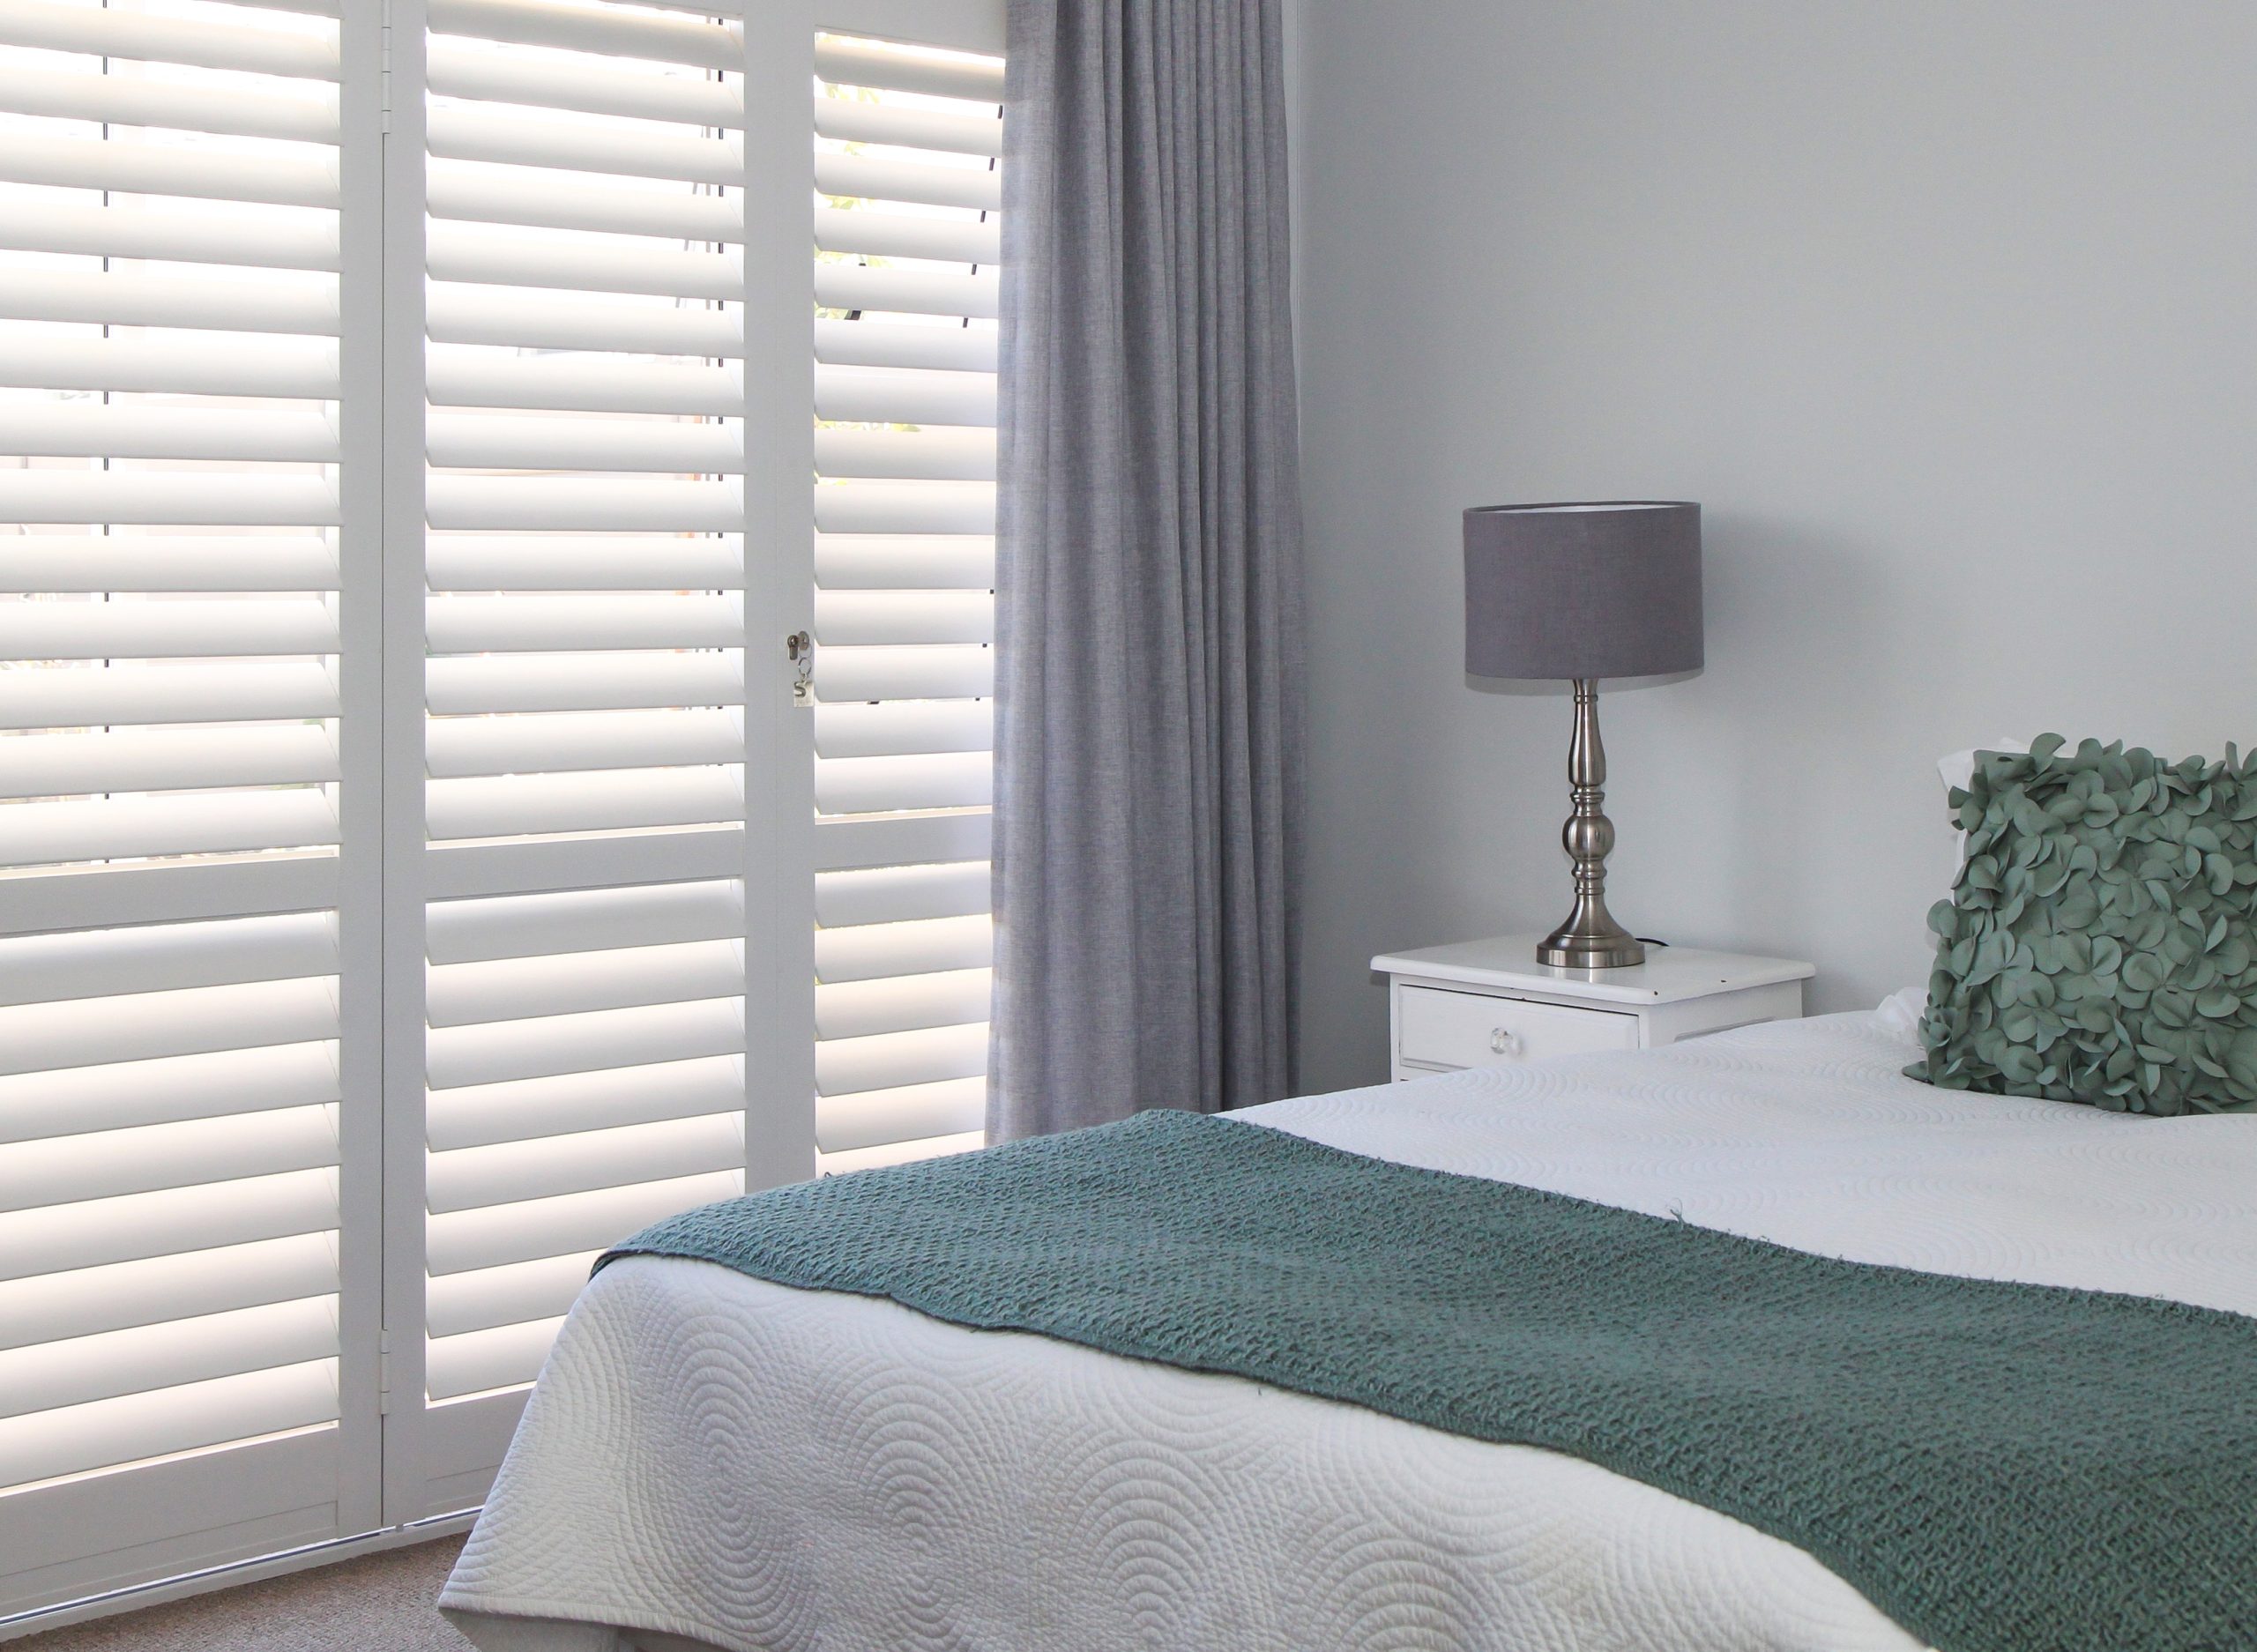 Images from American Shutters_Shuttercraft_Hi Res (4) (1)